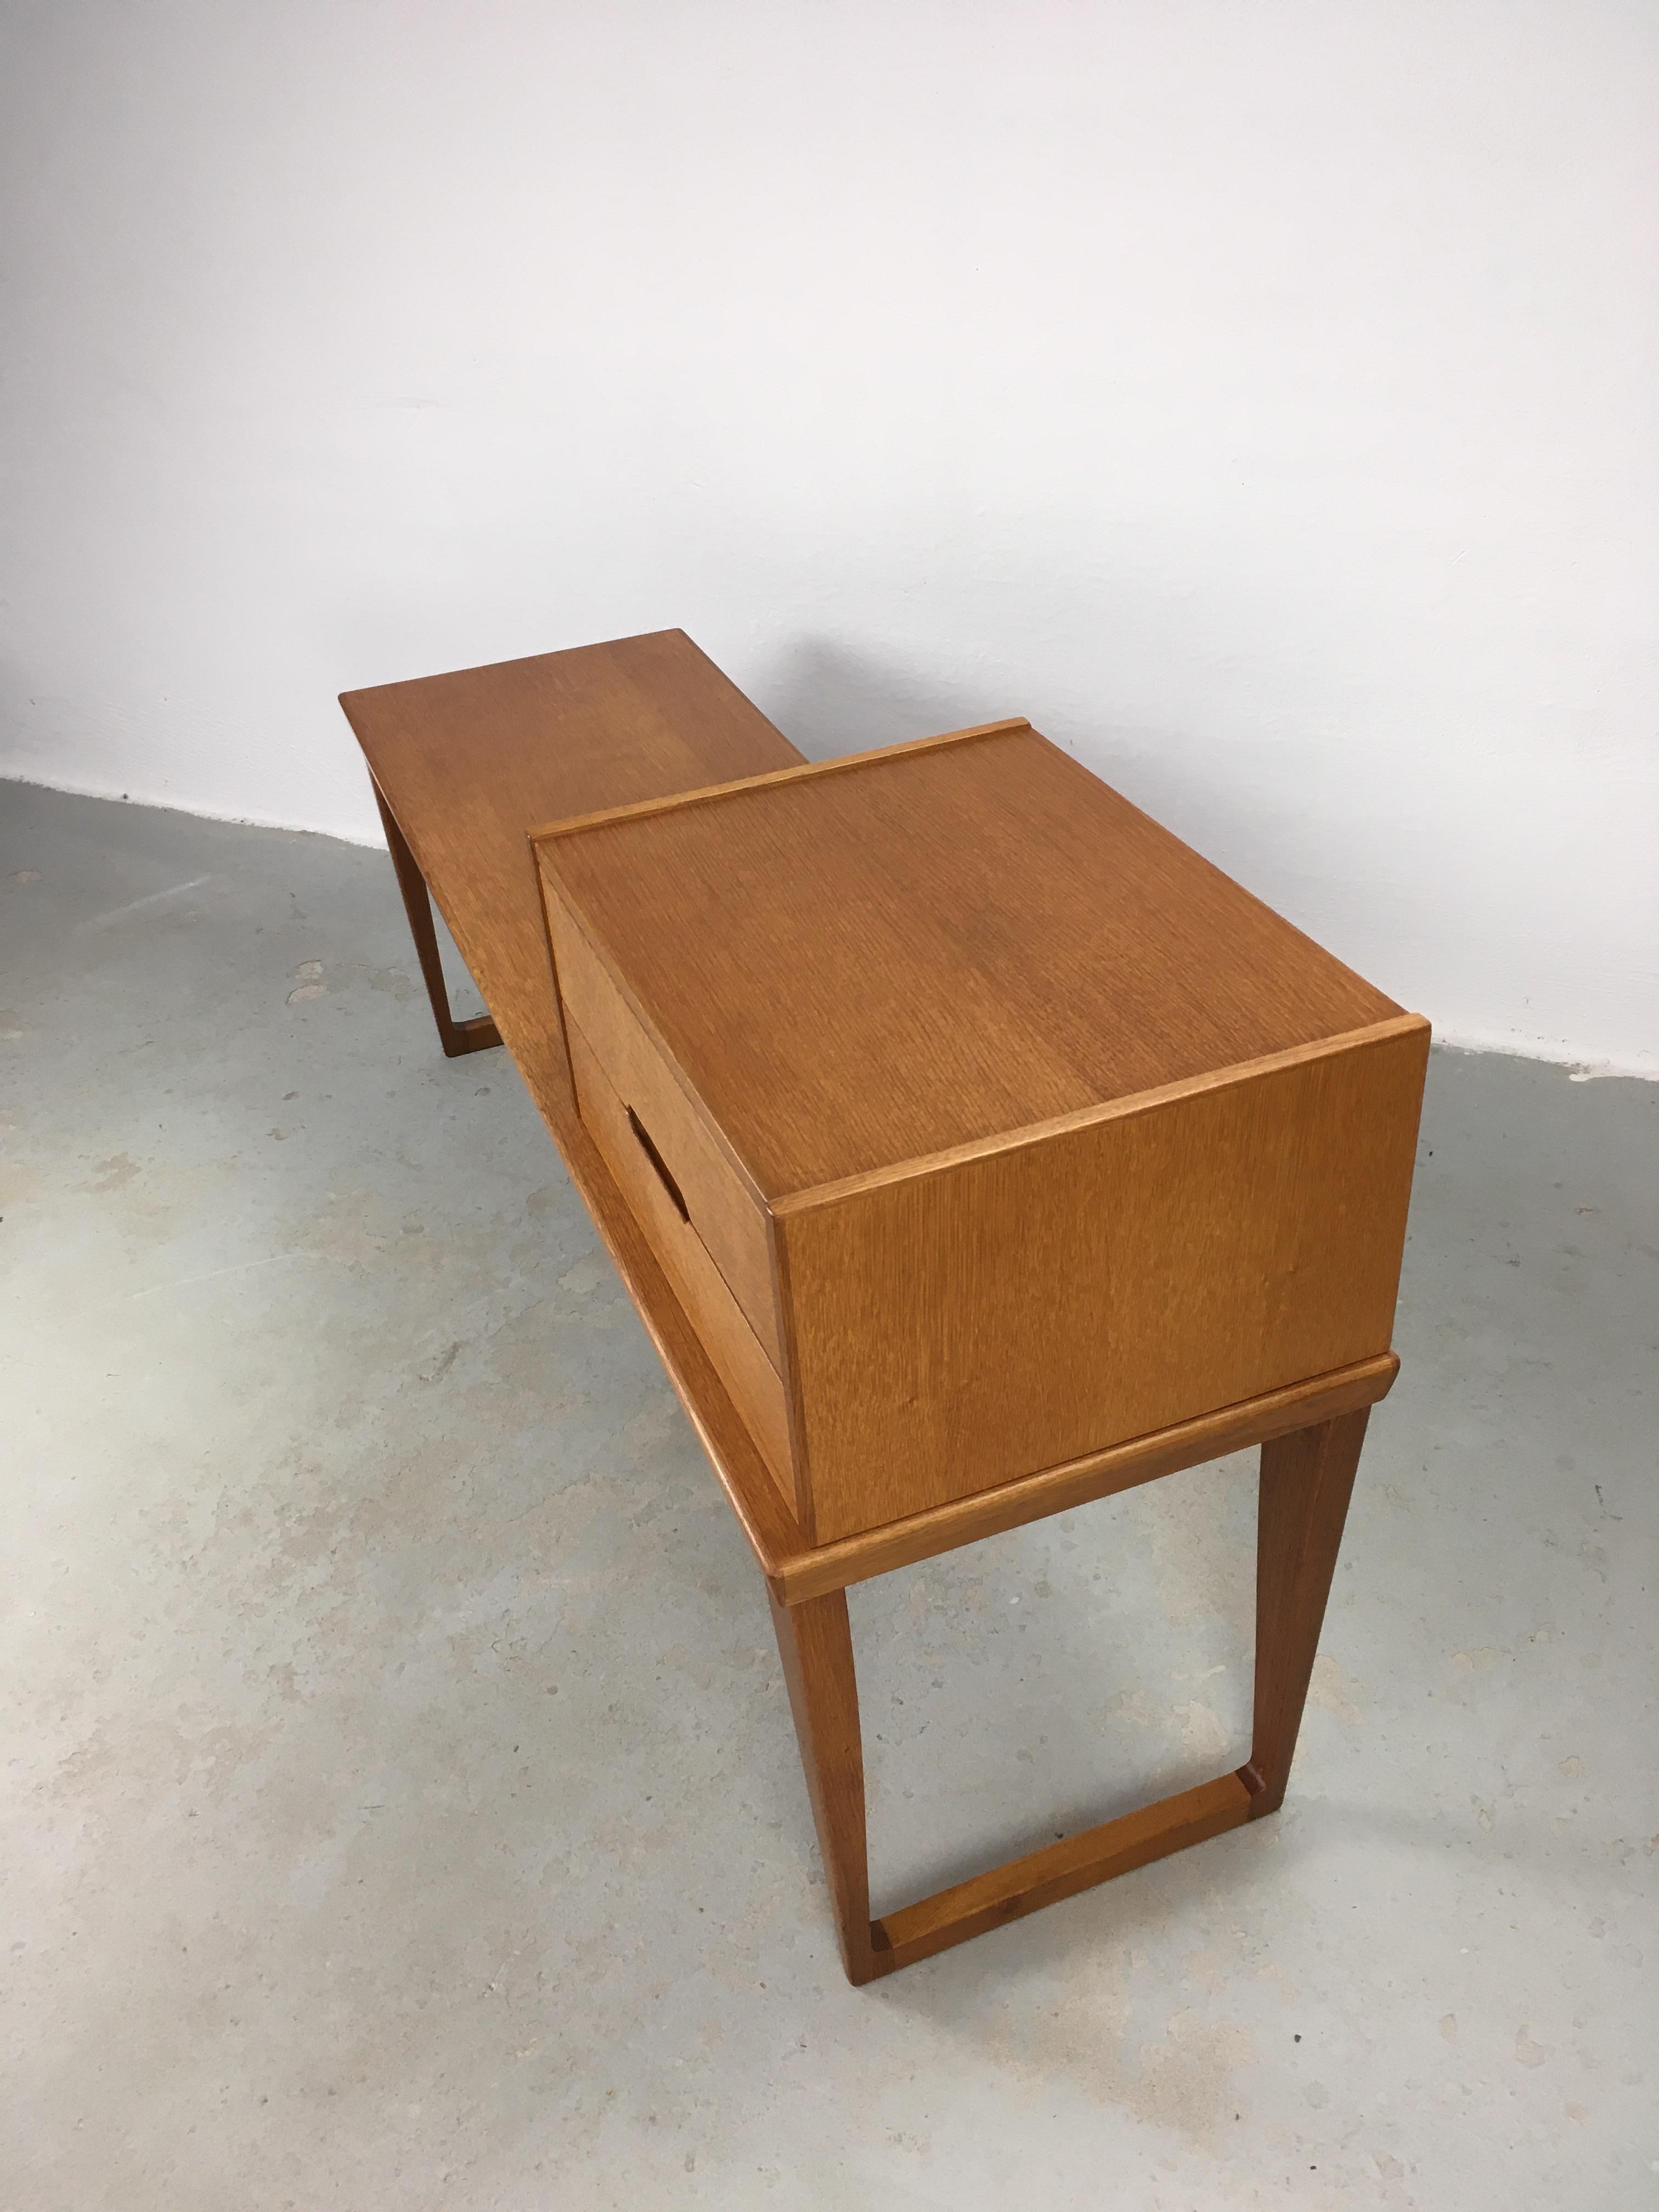 Restored and Refinished Kai Kristiansen Oak Side Table with Chest of Drawers In Good Condition For Sale In Knebel, DK